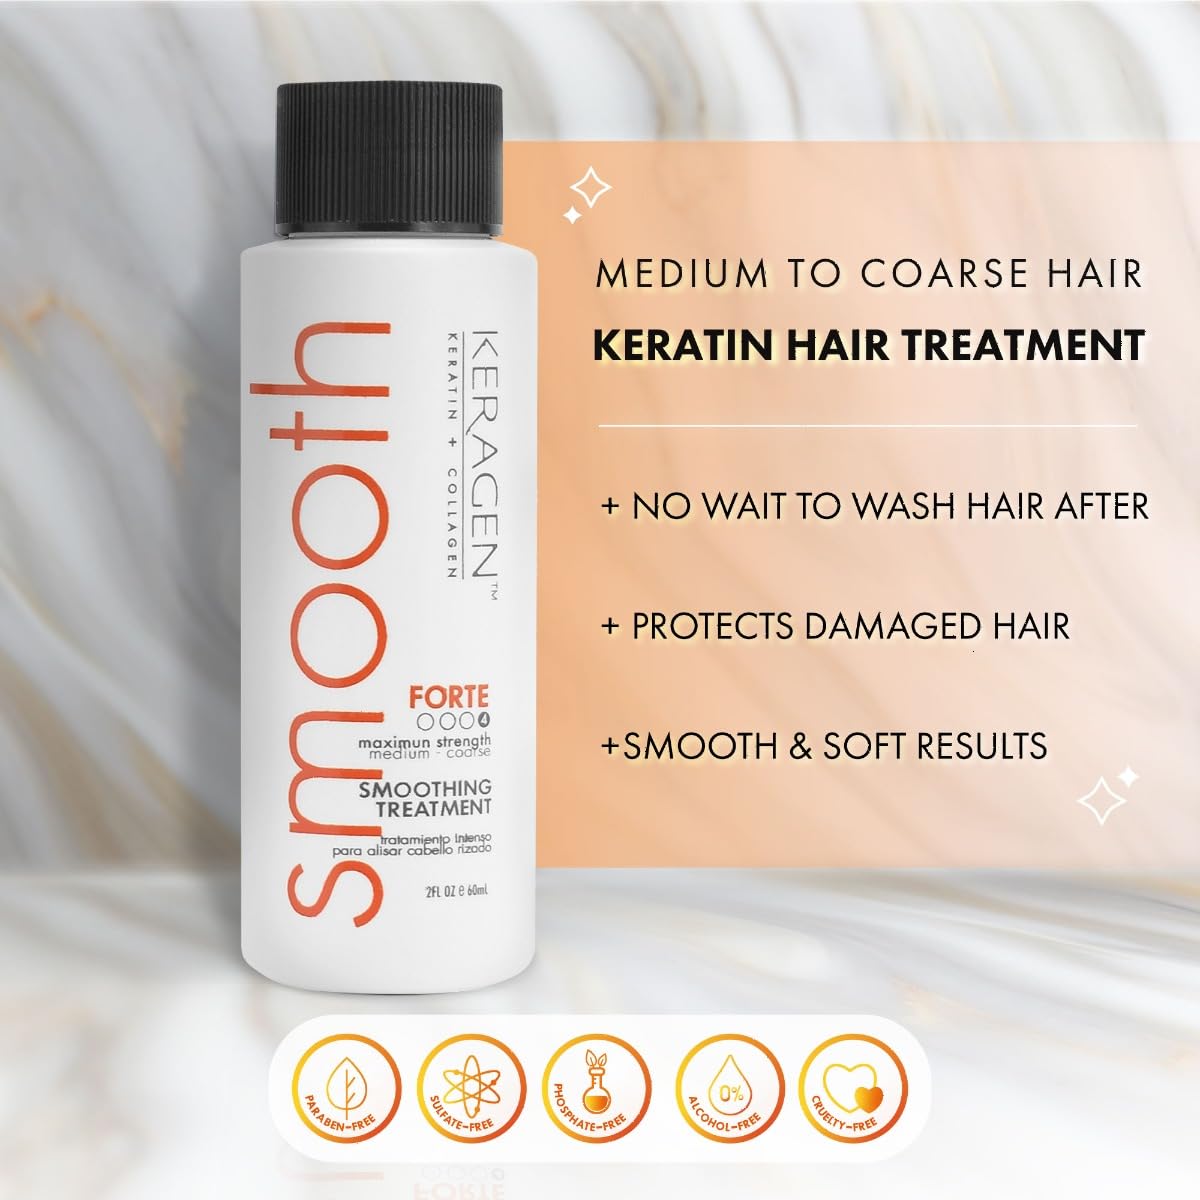 Keragen - Brazilian Keratin Smoothing Treatment, Blowout Straightening System for Dry and Damaged Hair - Forte, Sulfate Free - Eliminates Curls and Frizz, Medium to Coarse Hair (2 Oz)